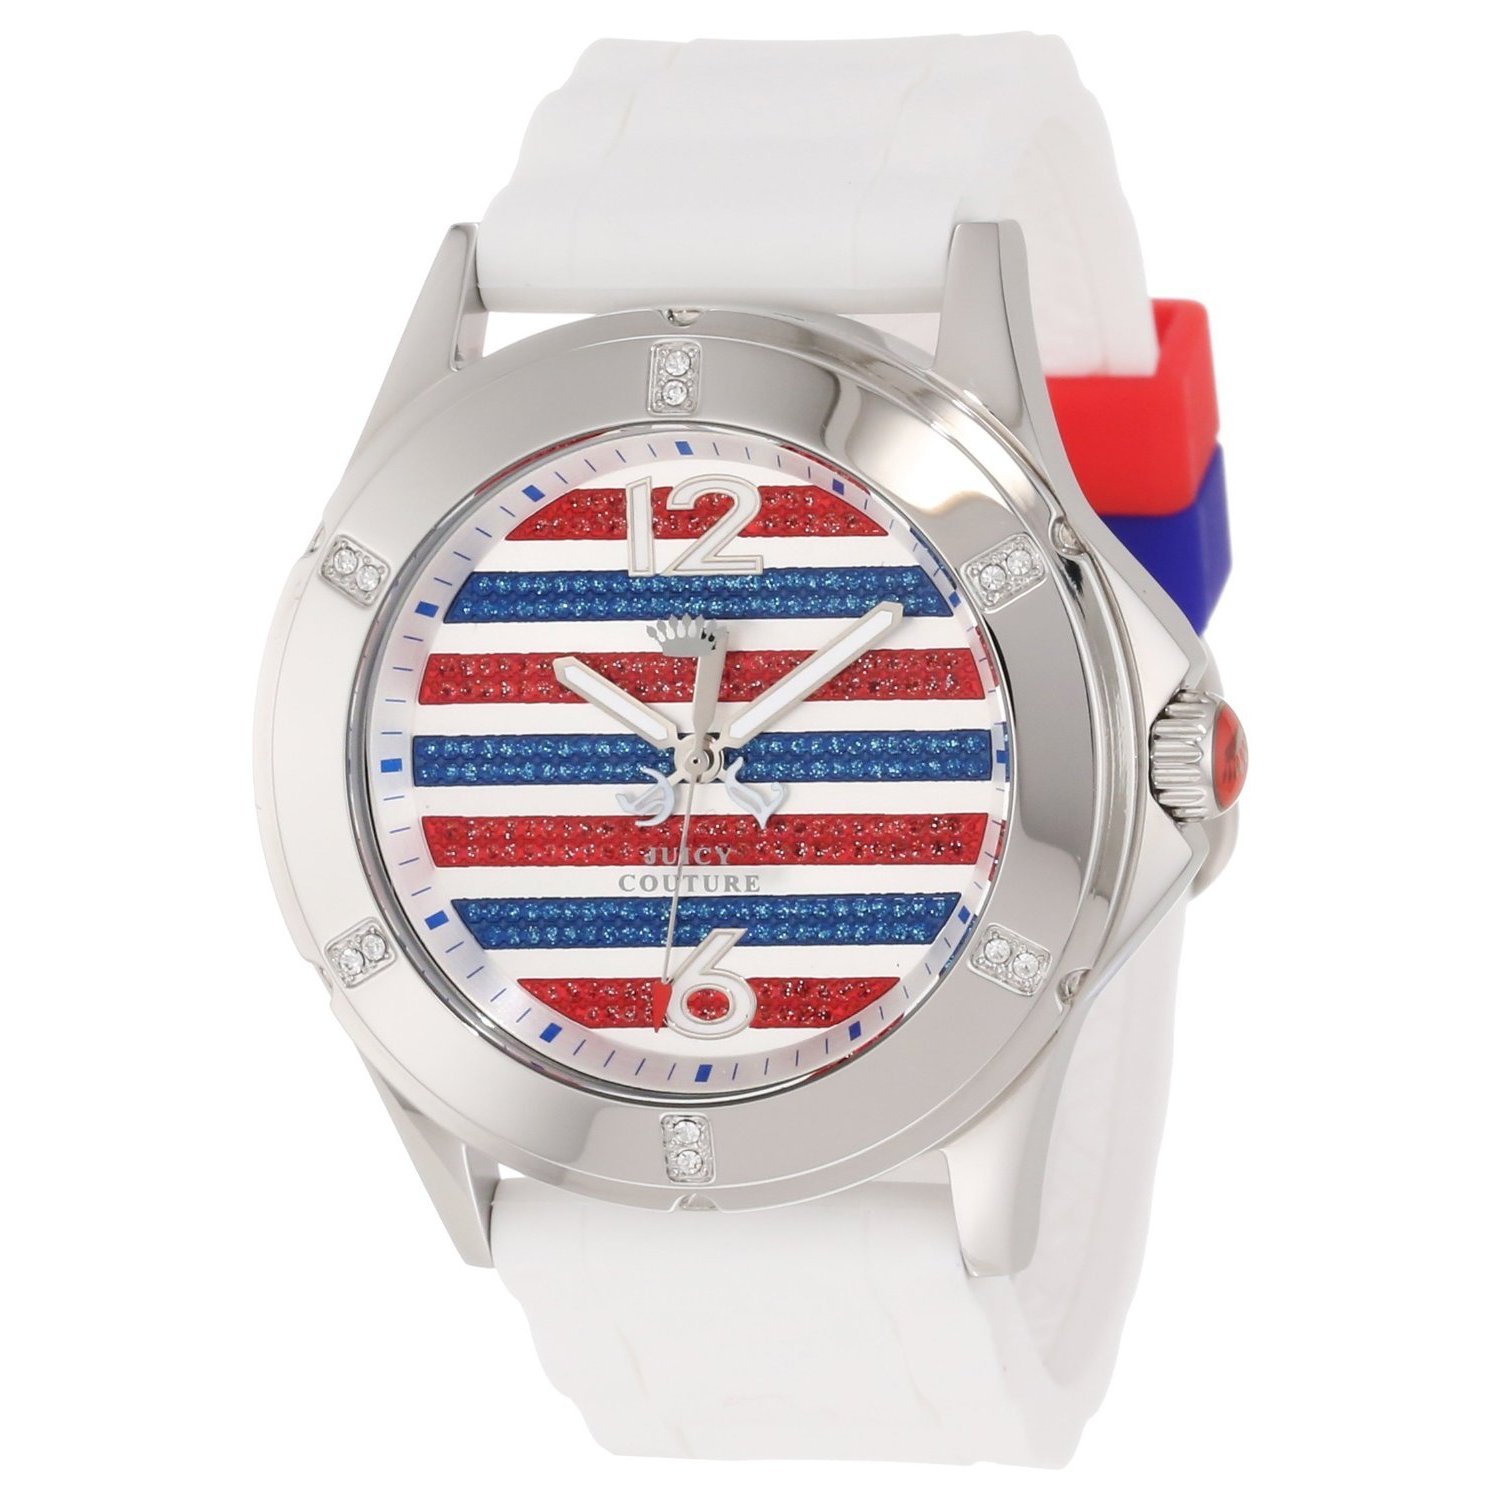 Juicy Couture Women's 1900998 Rich Girl Nautical White Silicone Strap Watch $99.99